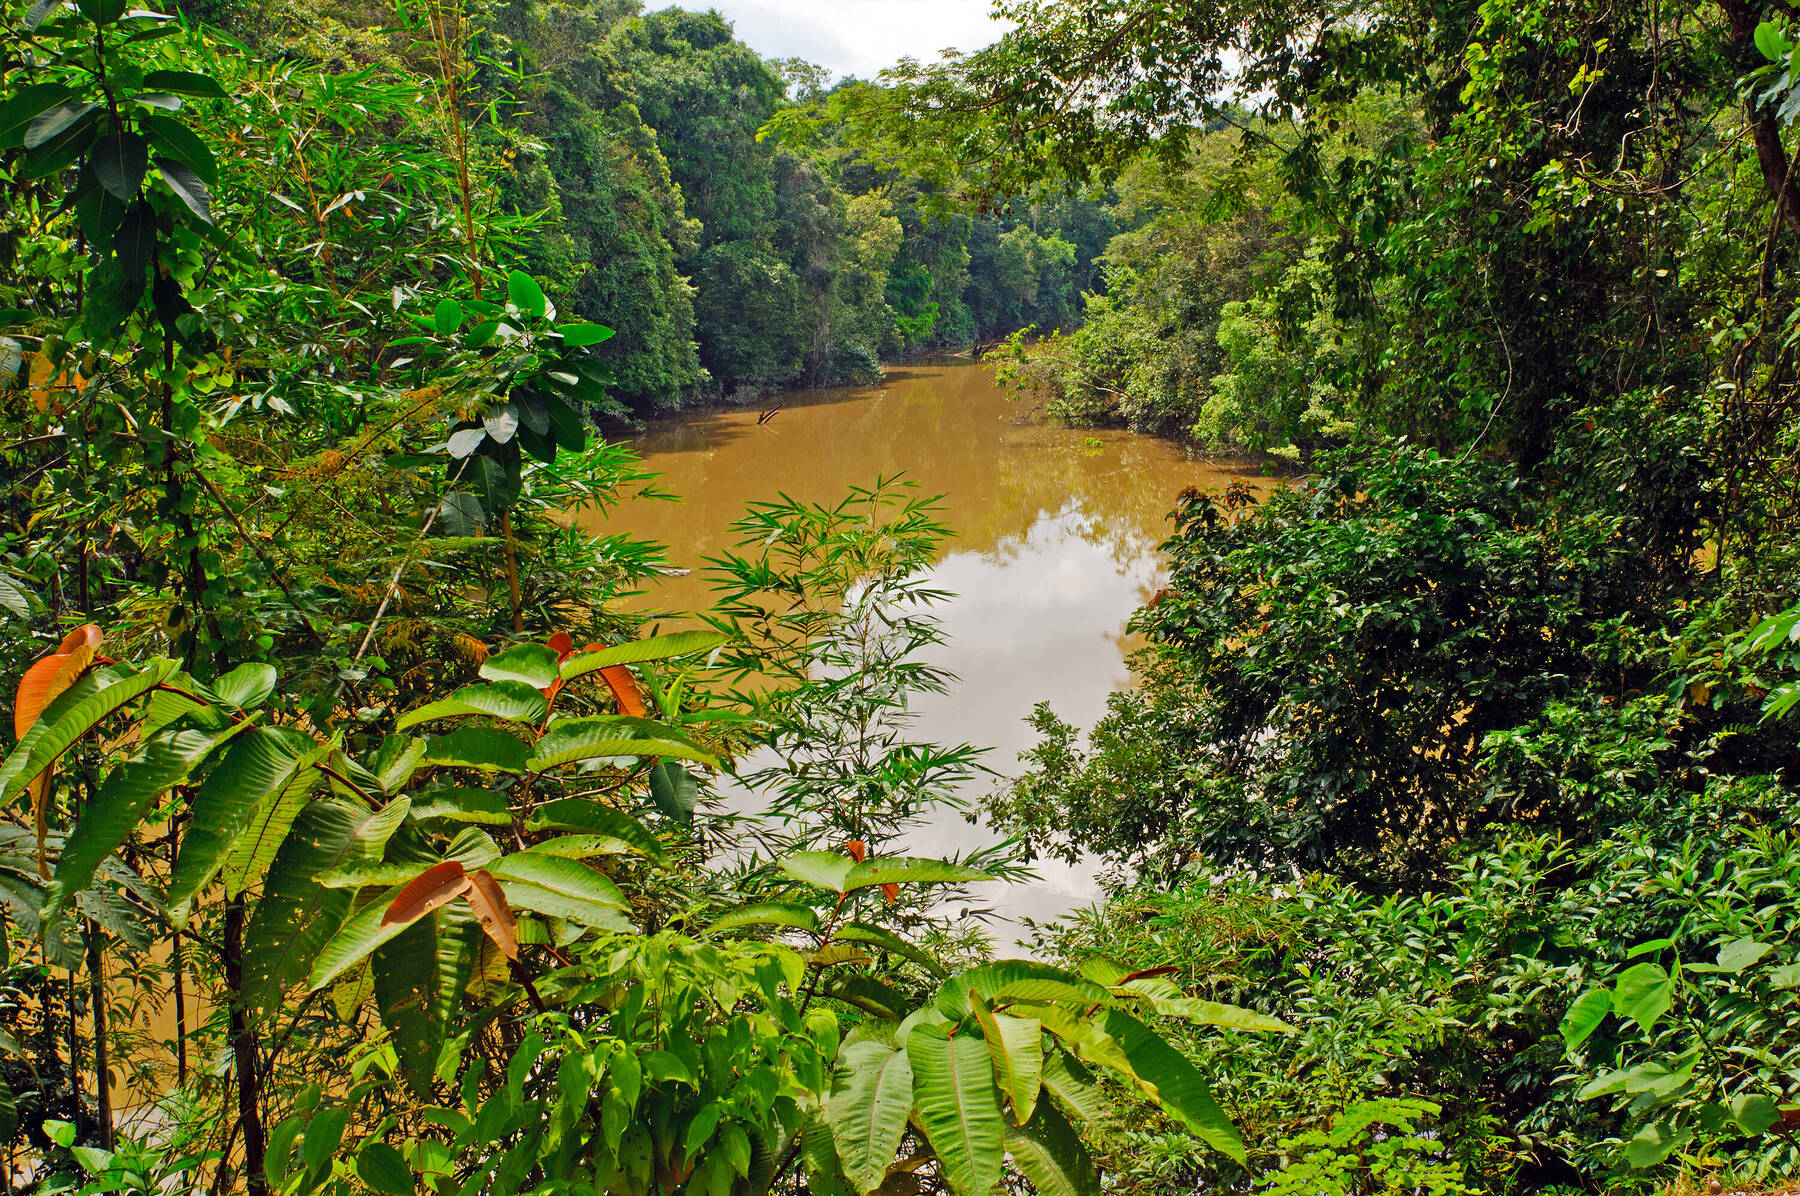 A Tributary of the Amazon – the Napo River